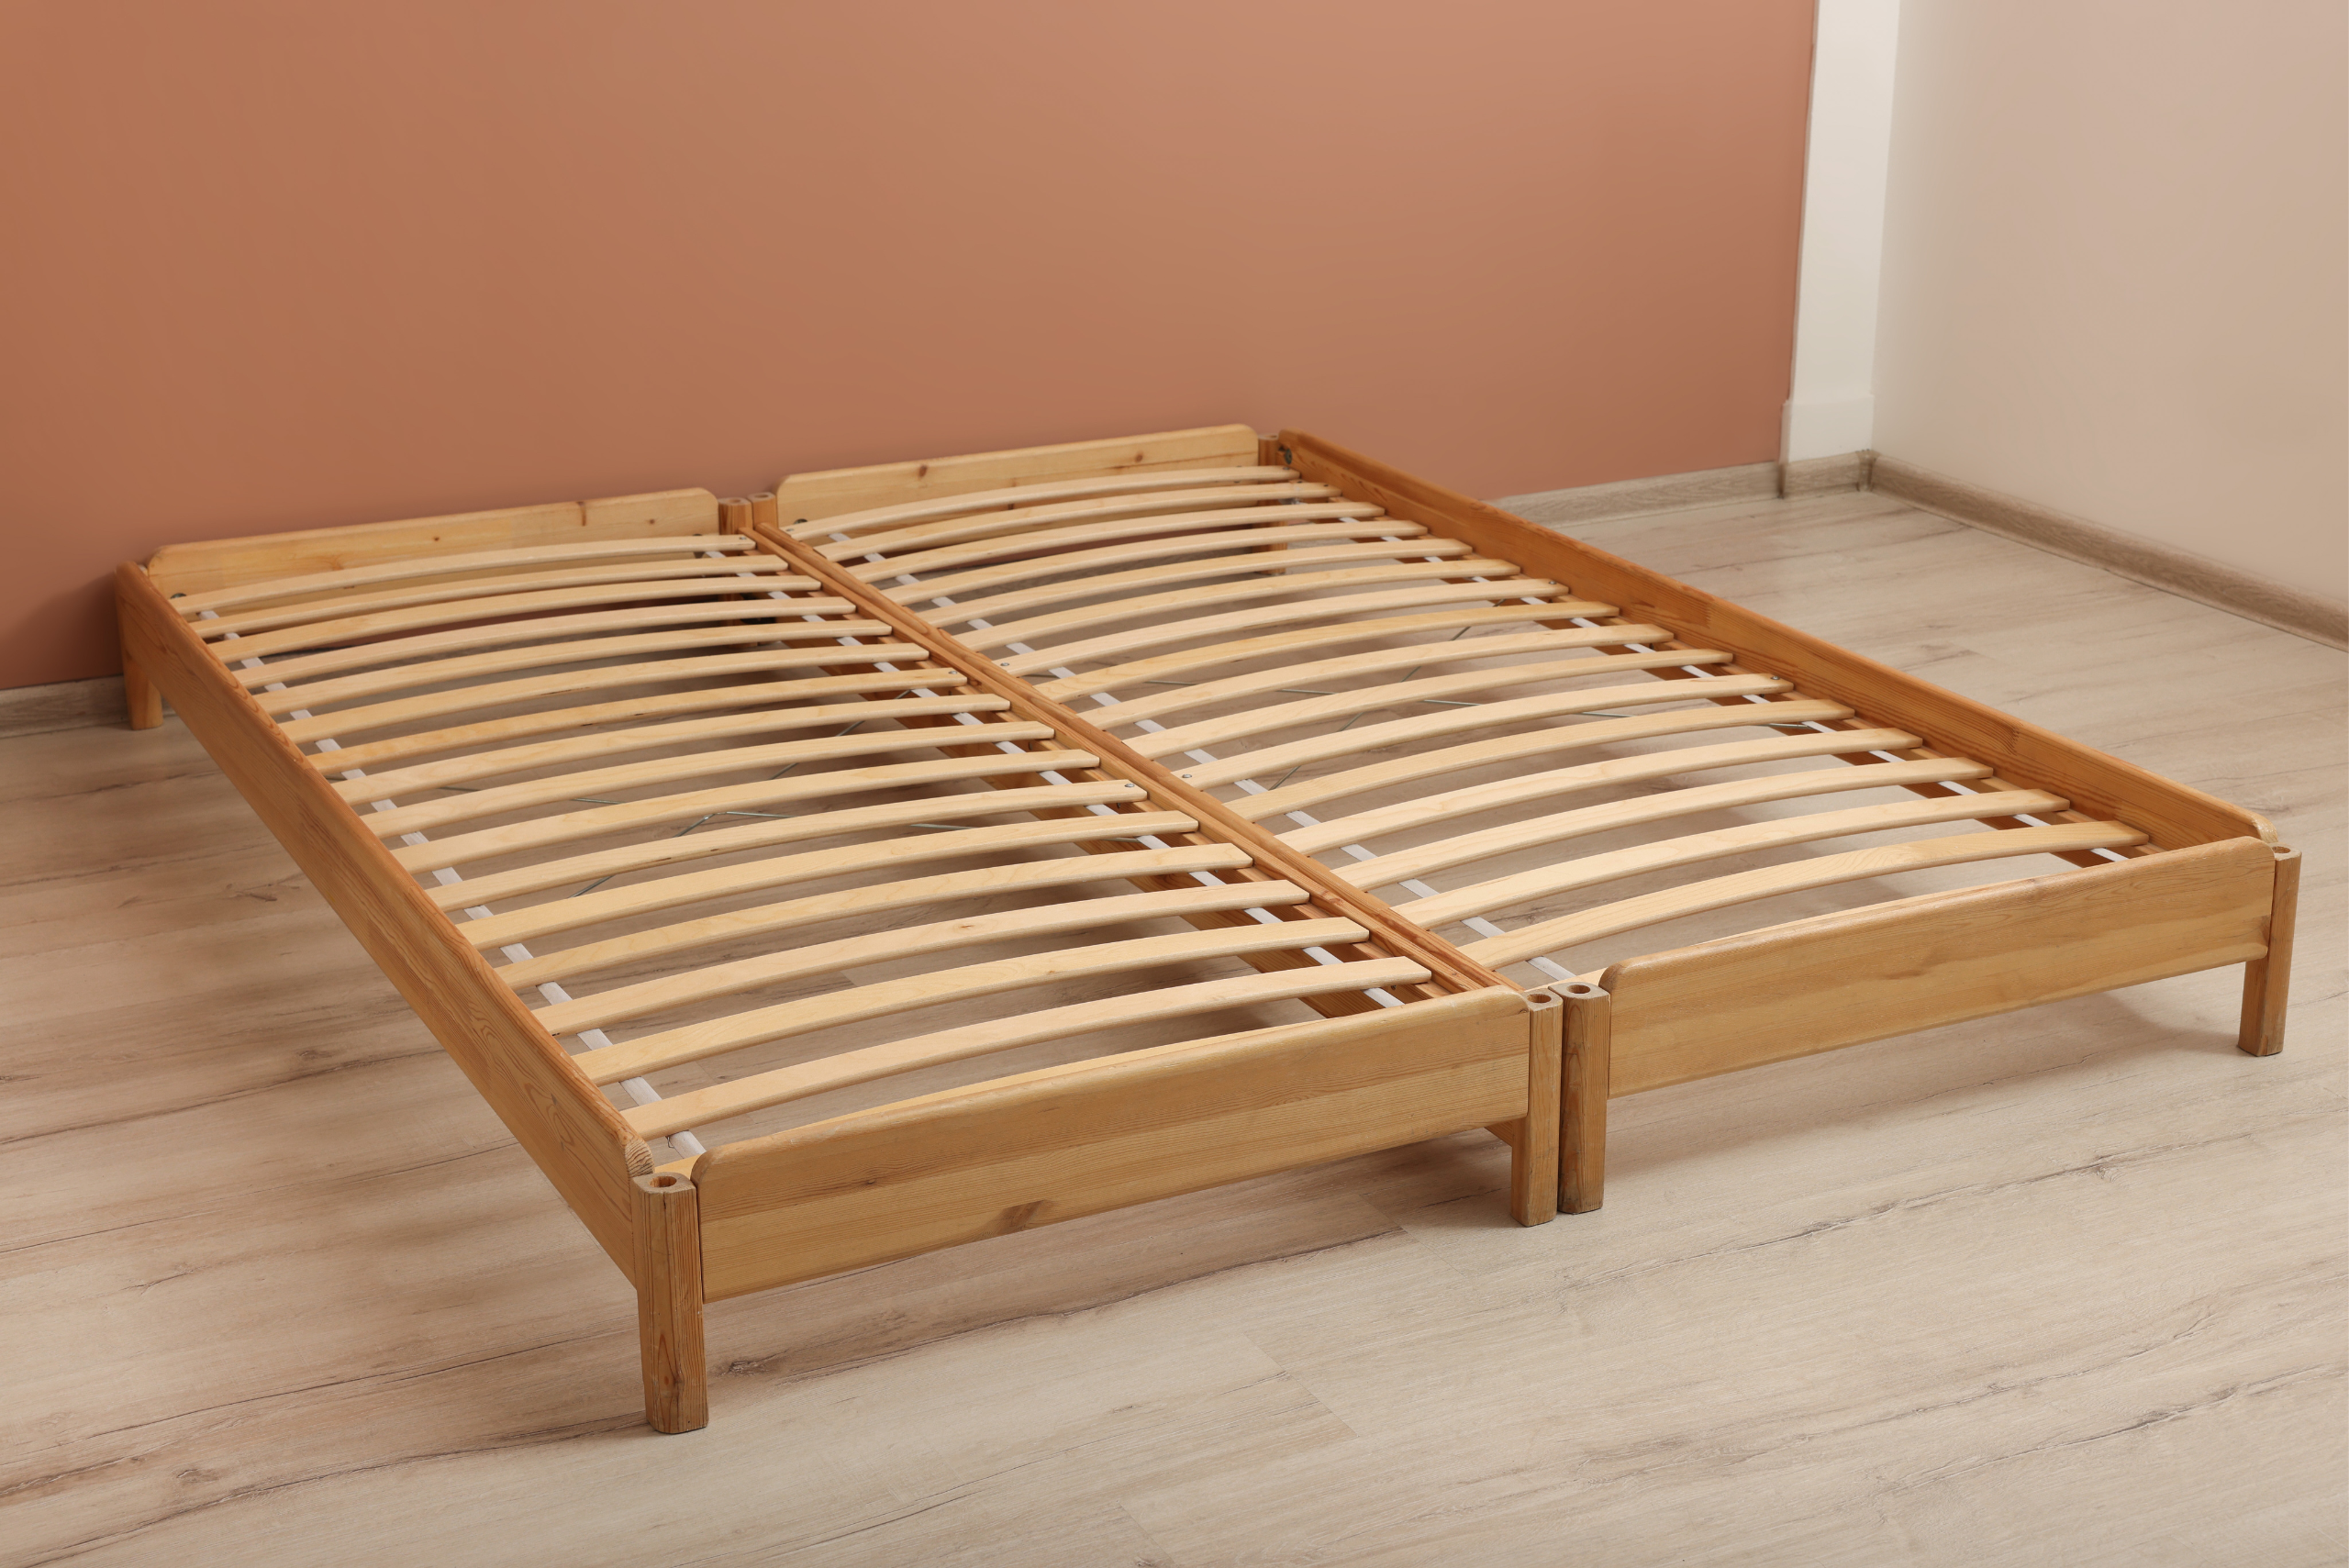 Bare wooden bed frame in an empty room.